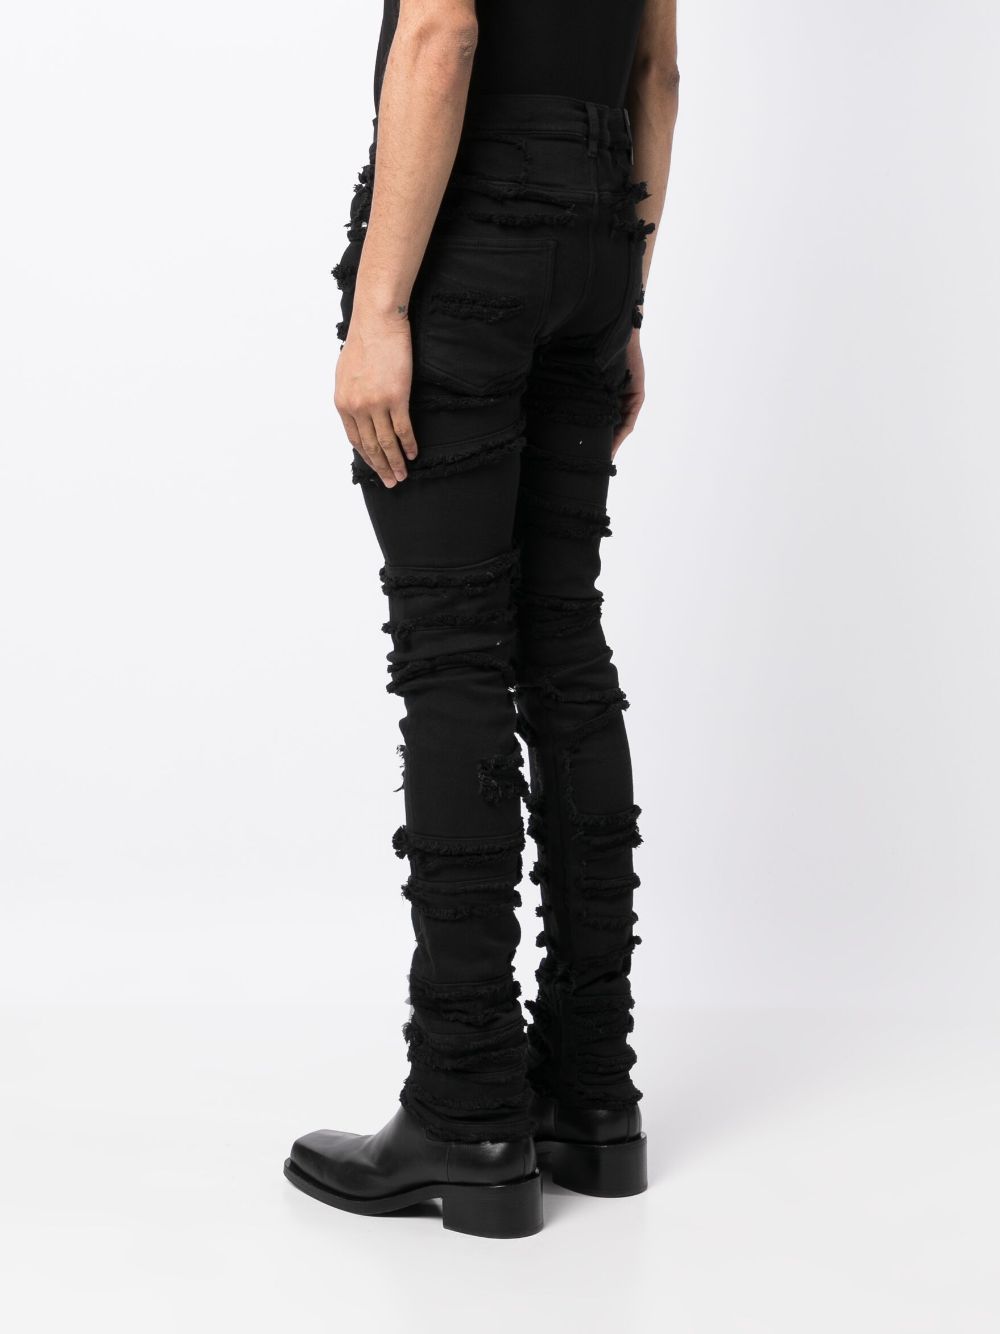 distressed frayed skinny jeans